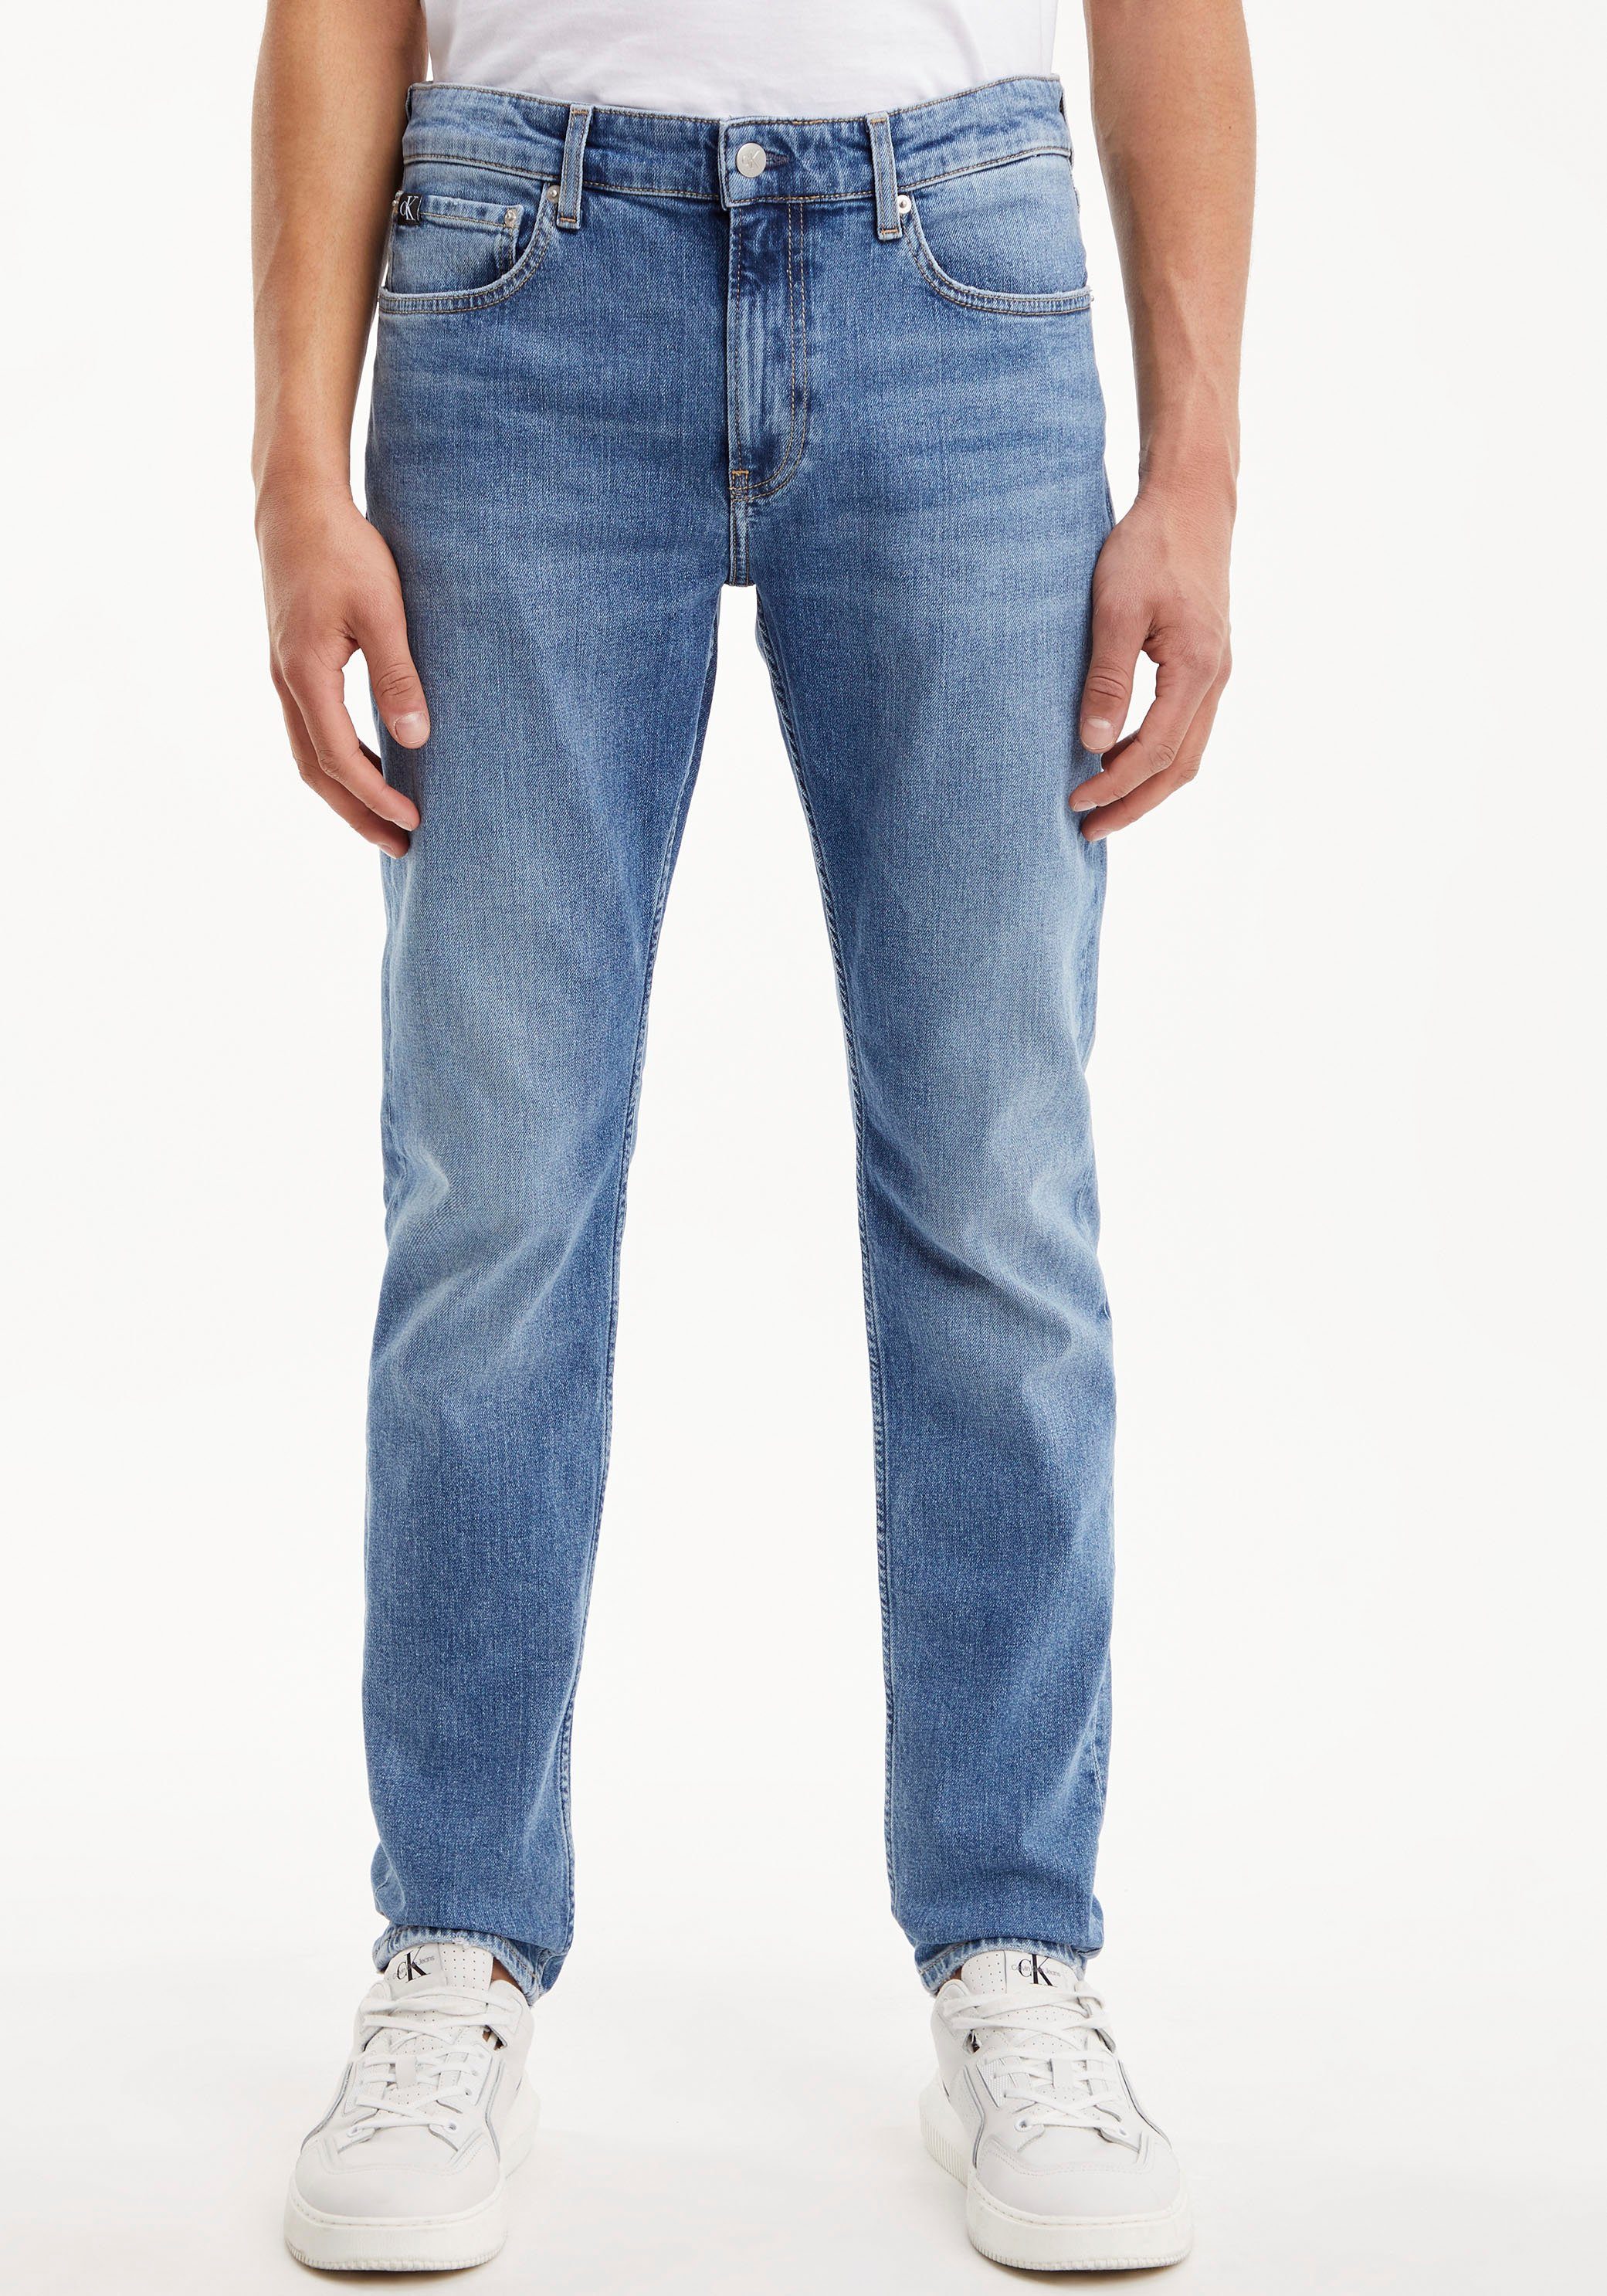 Calvin Klein Jeans Tapered-fit-Jeans SLIM TAPER mit Calvin Klein Leder-Badge | Tapered Jeans